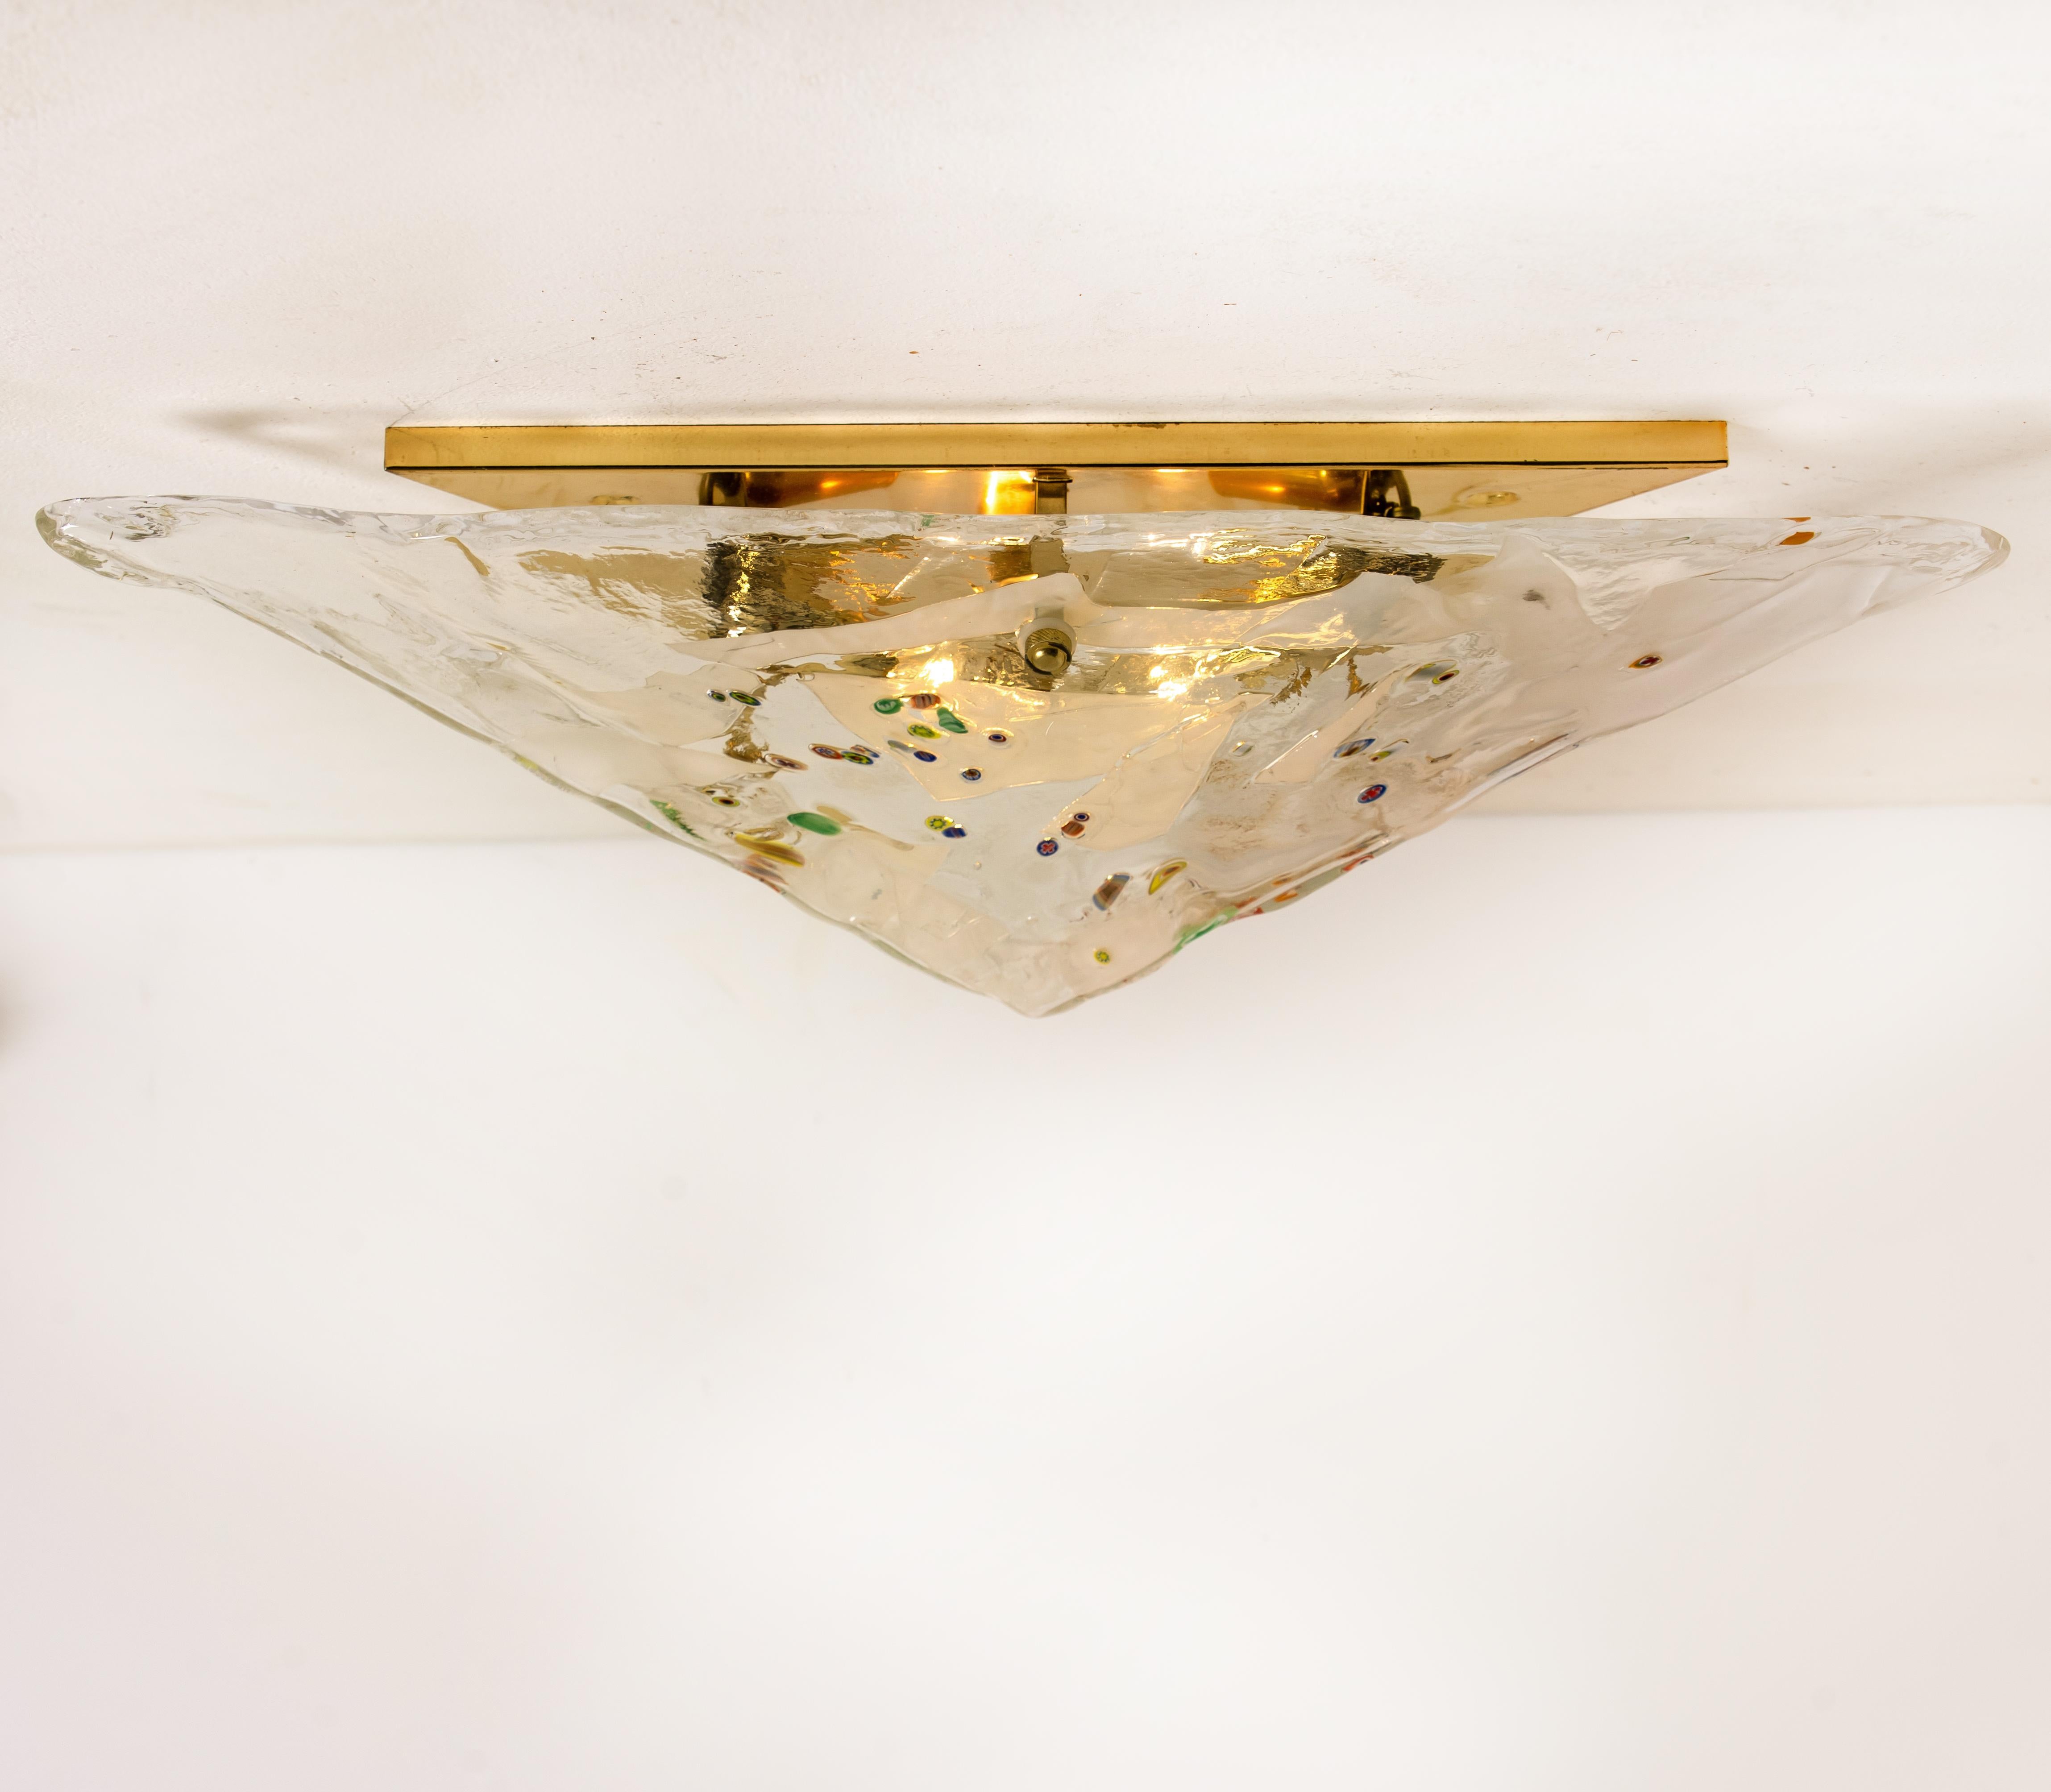 A rare gold-plated Venini flushmount with three clear opal glass shades of Murano glass. With nice colored small confetti glass drops. Modulated in the form of a pyramid. The flush mounts are designed and produced in Italy from the late 1970s. A